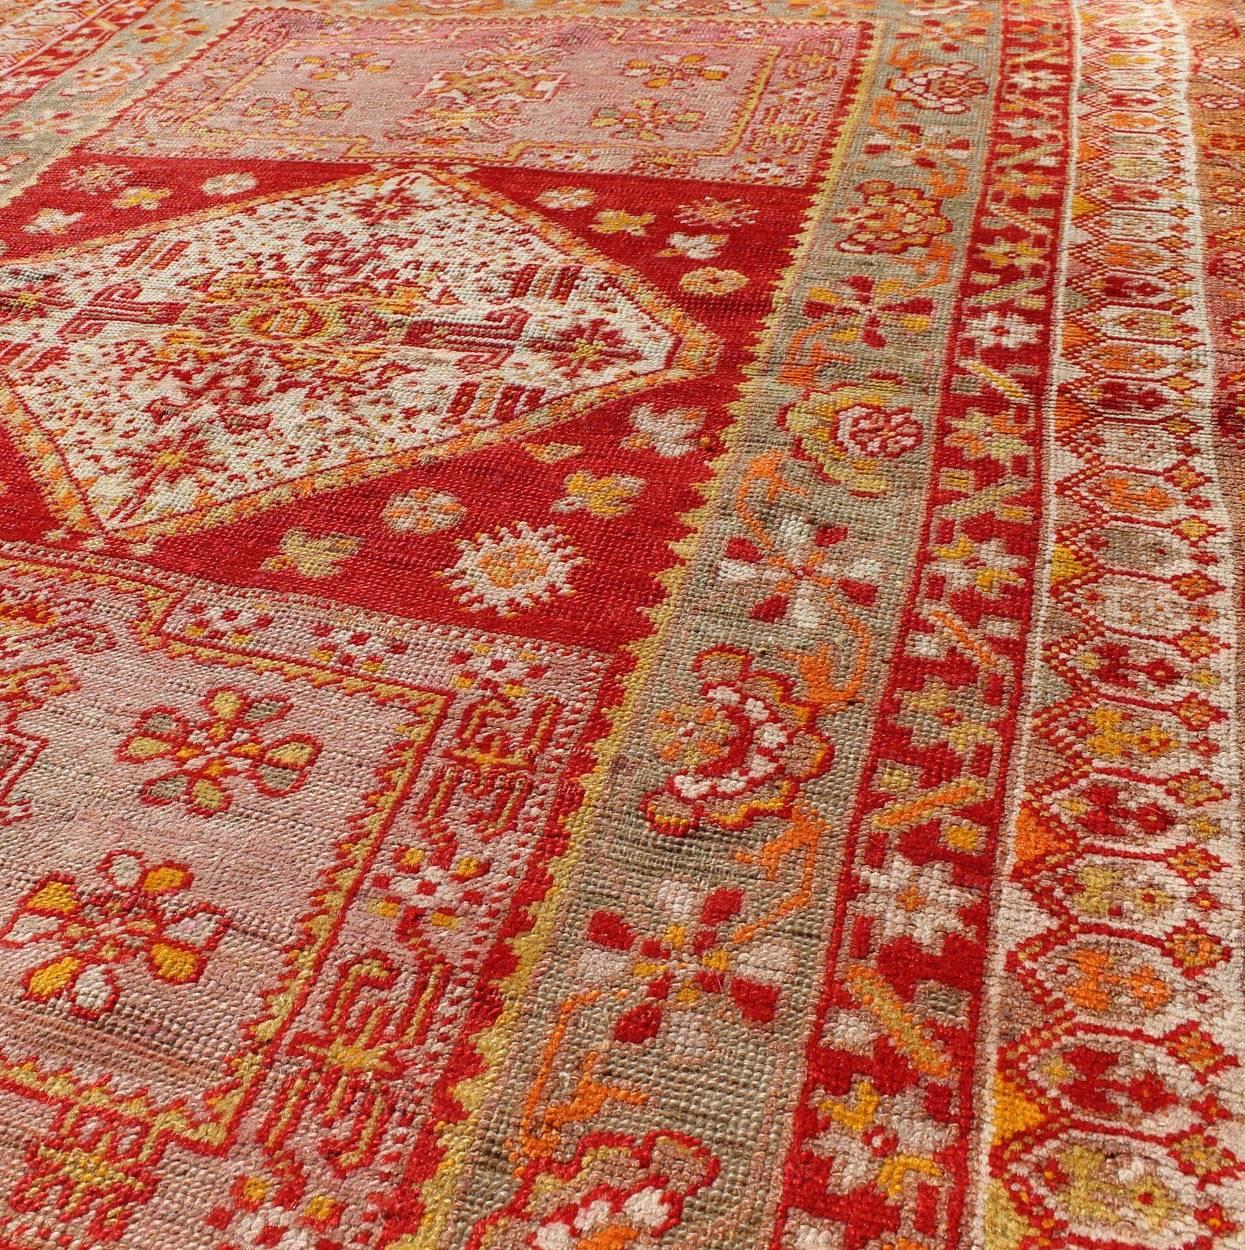 Early 20th Century Antique Turkish Oushak Rug with Colorful Flowing Floral and Geometric Motifs For Sale